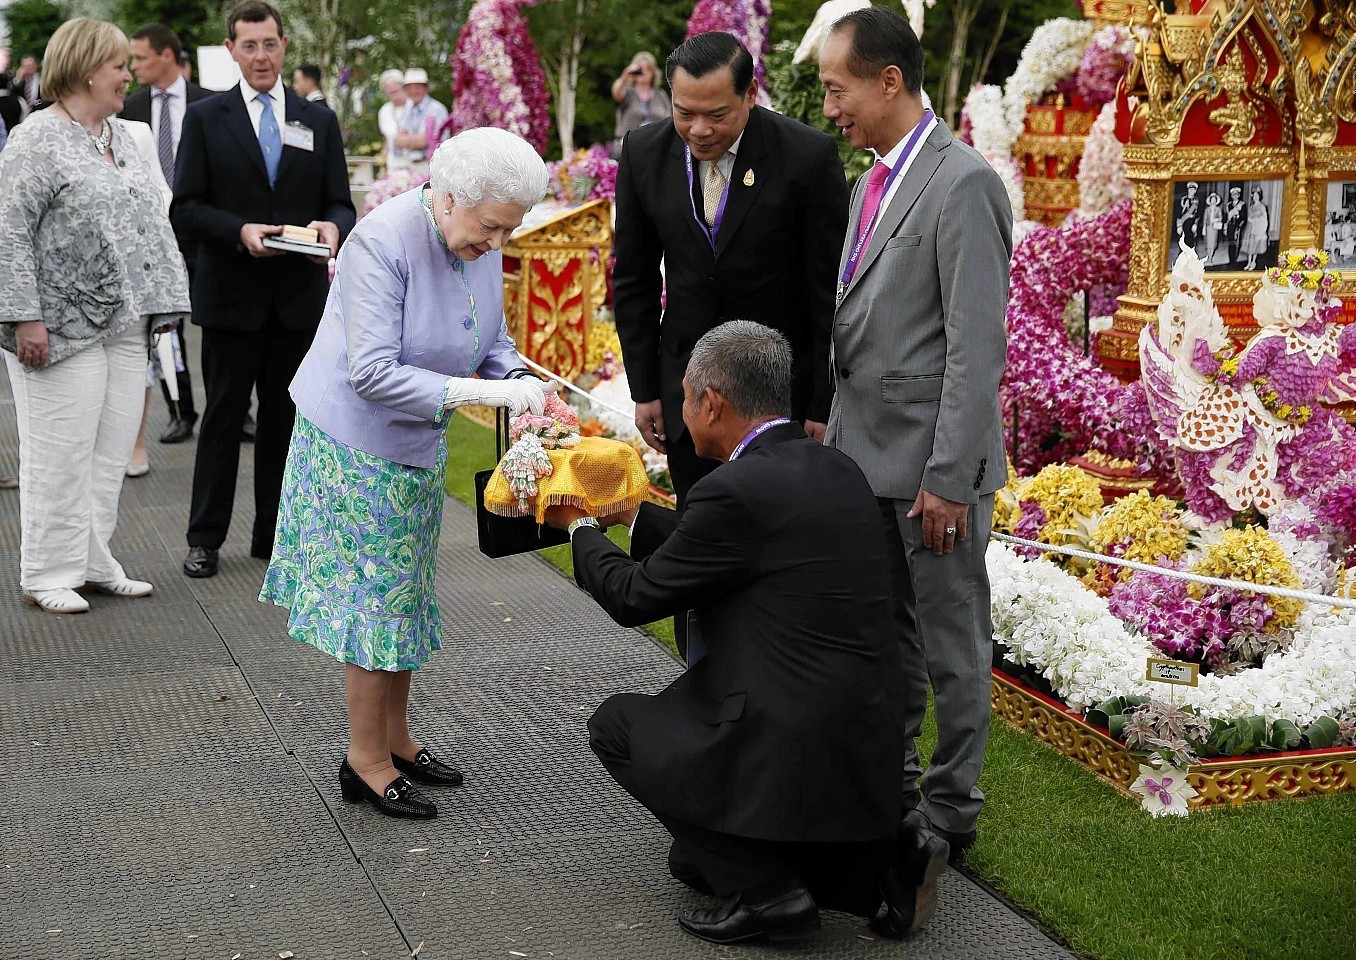 Queen Elizabeth II visits the Thai exhibit during a visit to the Chelsea Flower Show